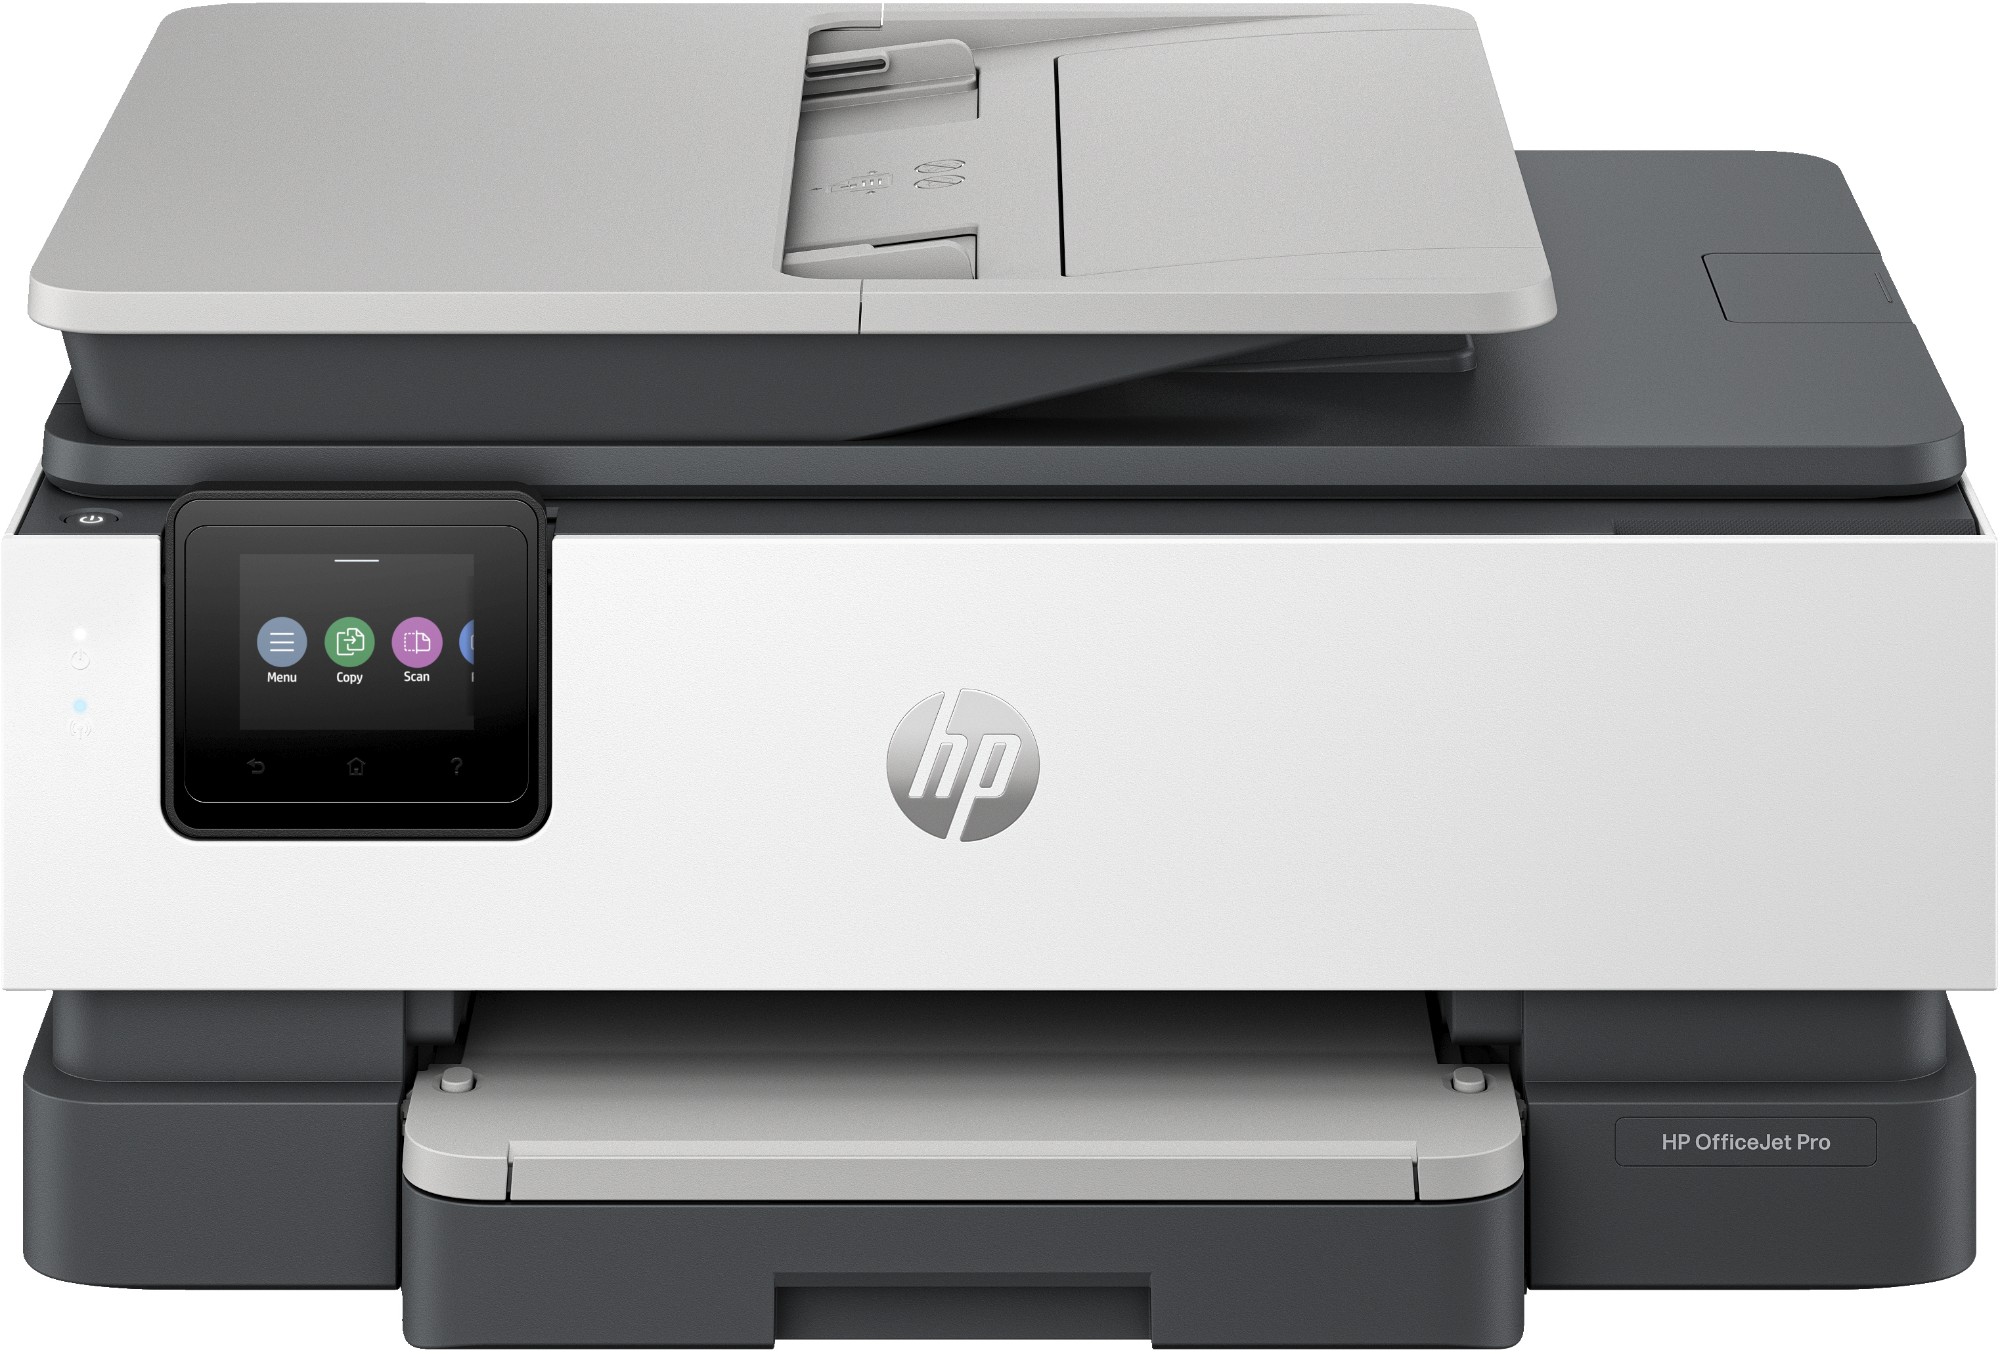 HP OfficeJet Pro HP 8132e All-in-One Printer, Colour, Printer for Home, Print, copy, scan, fax, HP Instant Ink eligible; Automatic document feeder; Touchscreen; Quiet mode; Print over VPN with HP+